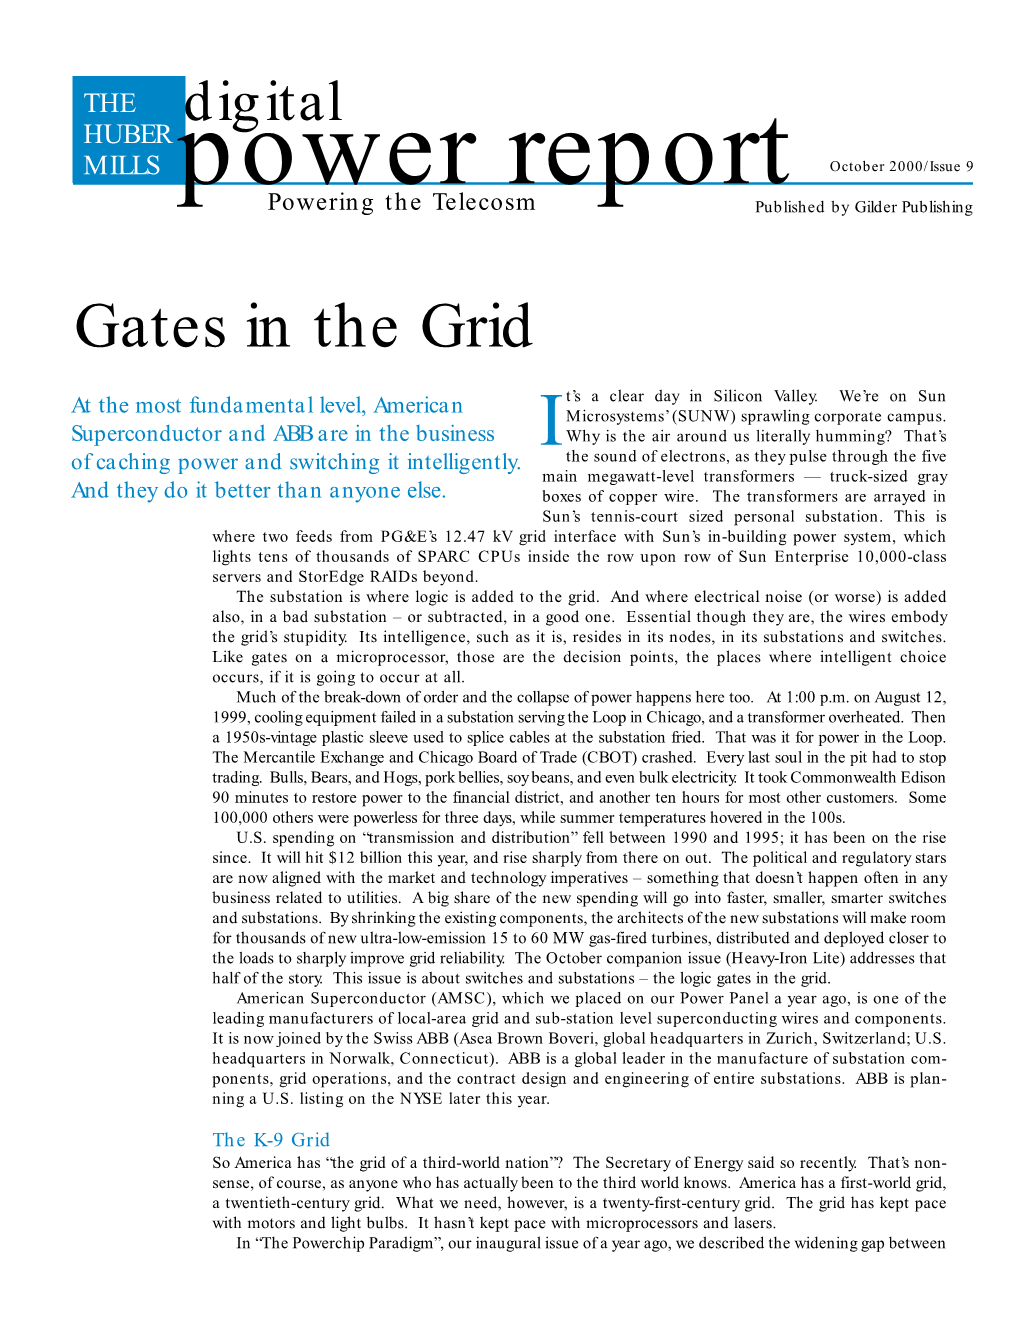 Gates in the Grid